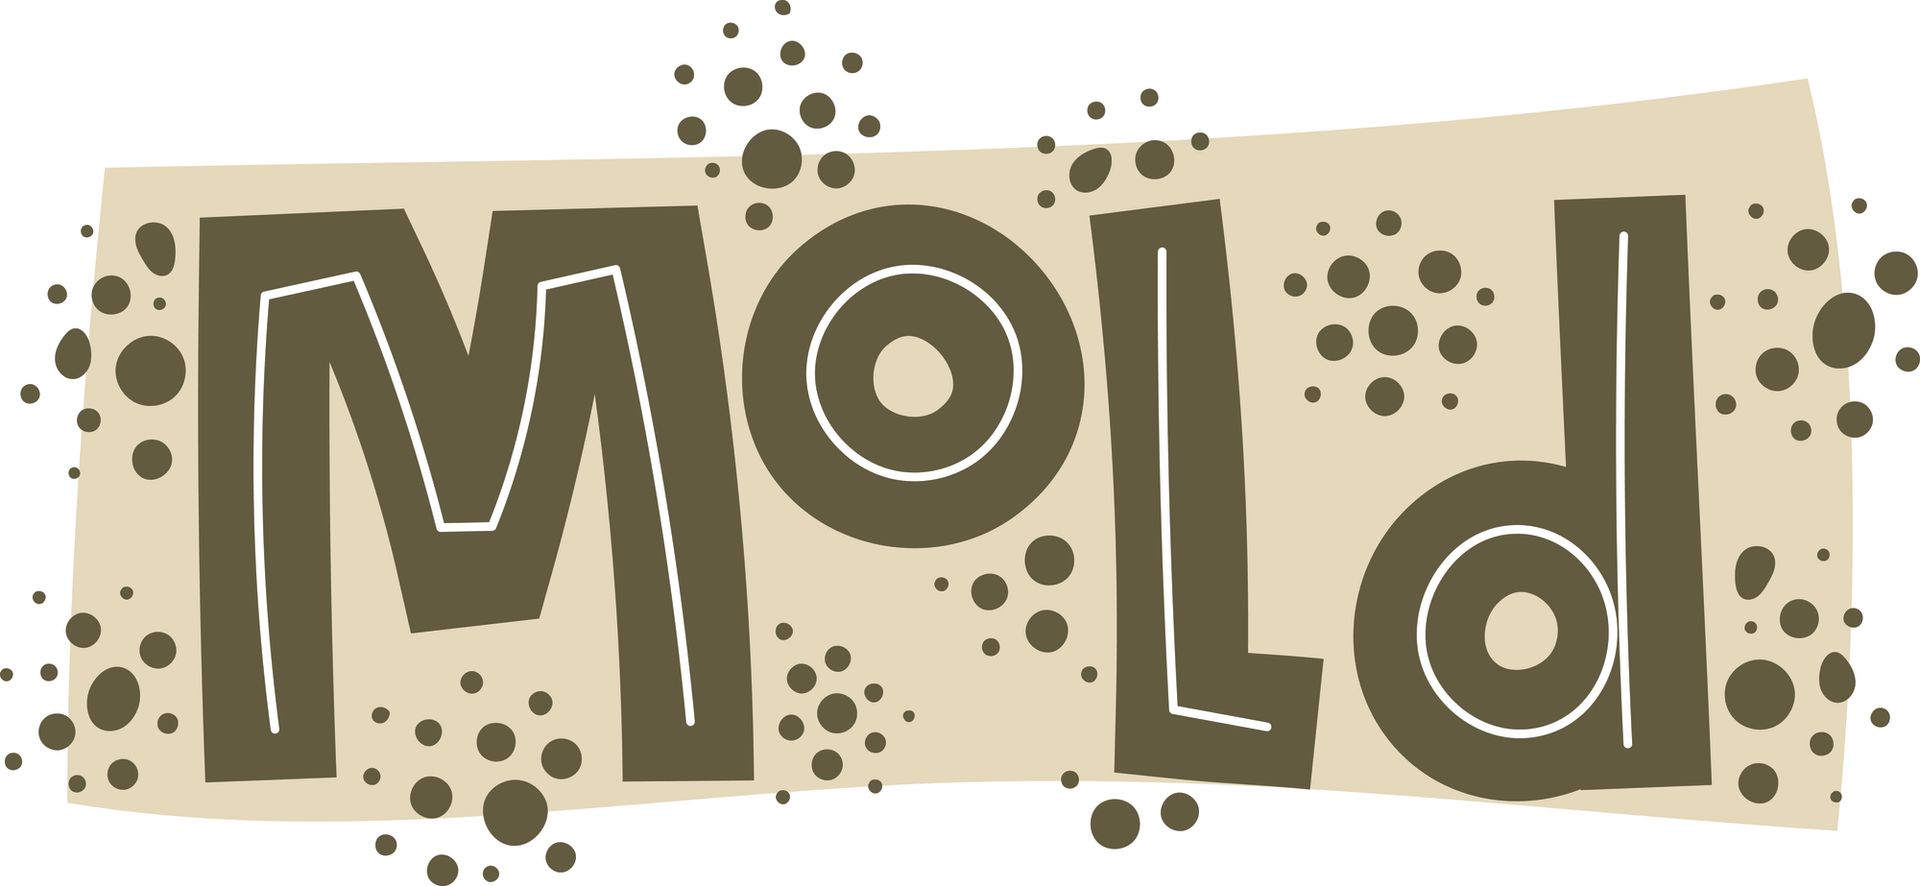 Mold Remediation vs Mold Removal: What's the Difference